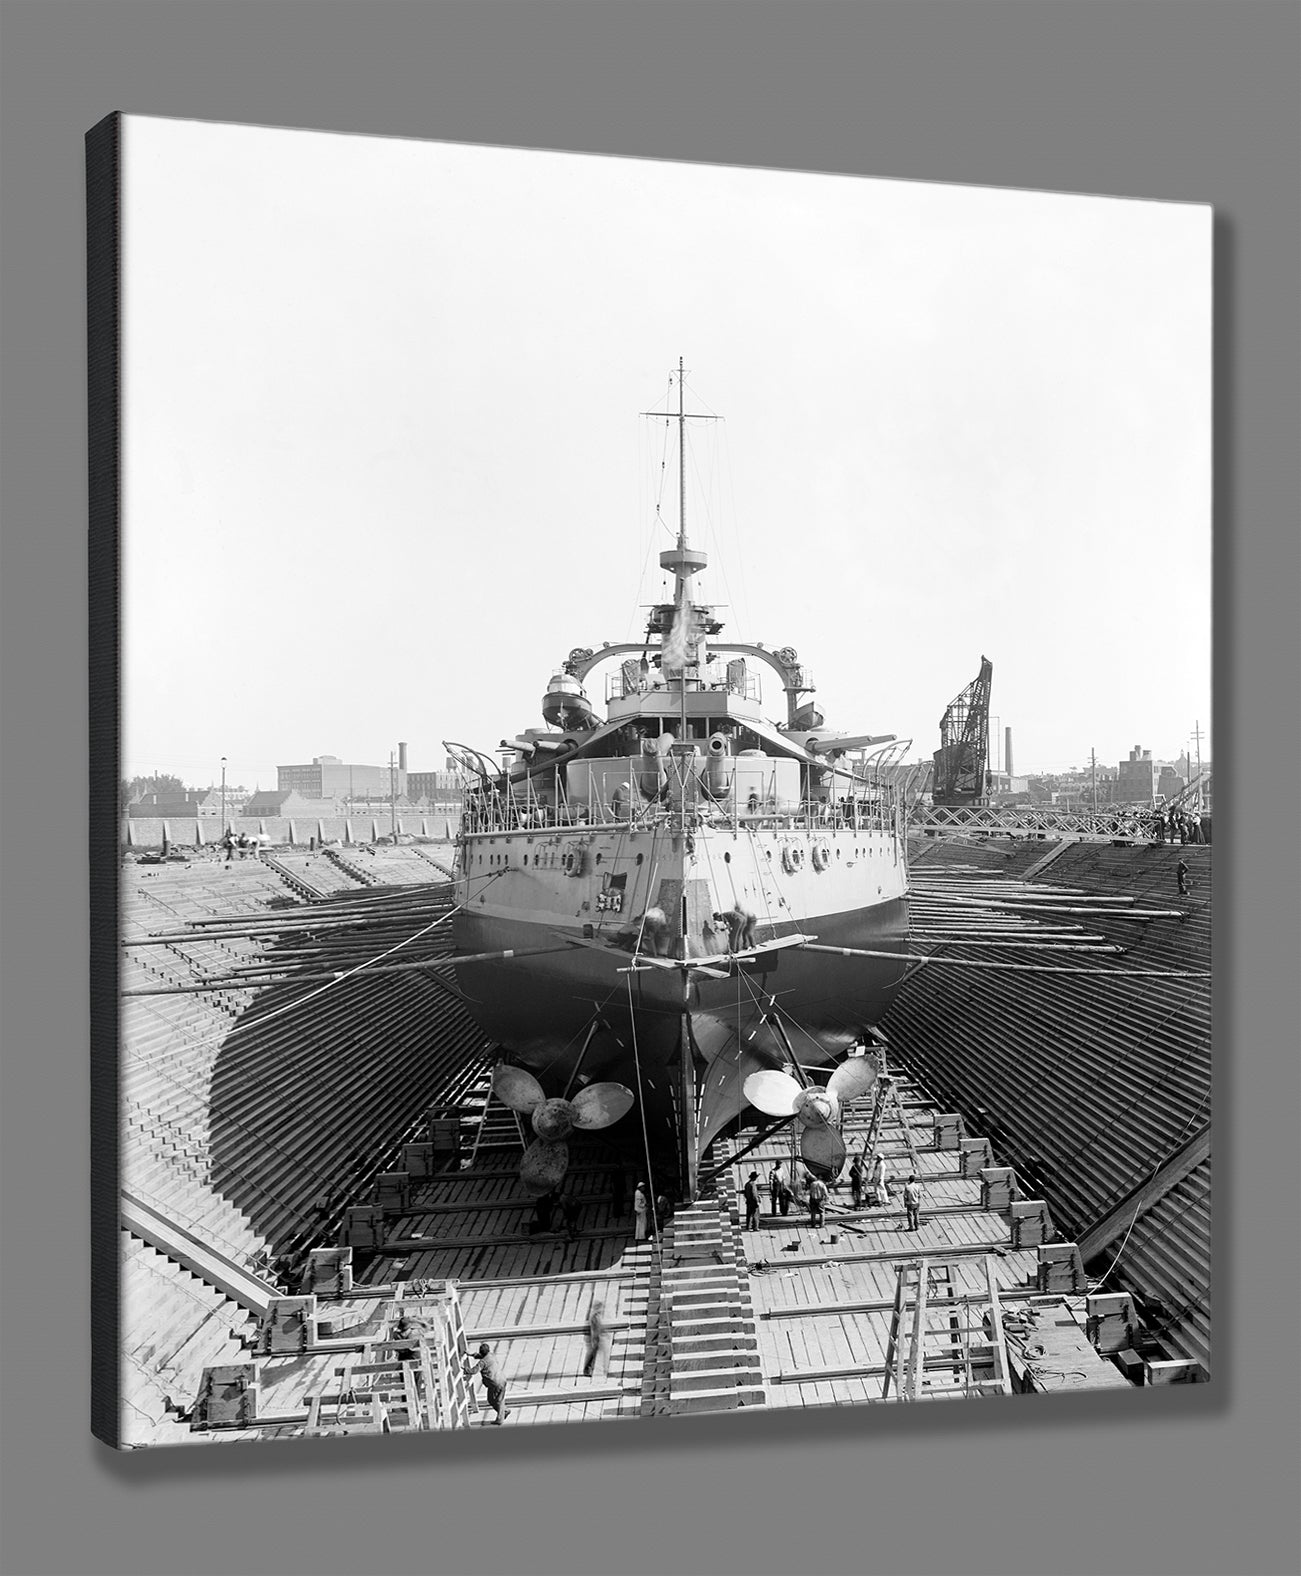 A canvas print reproduction of a photograph of the USS Oregon at the Brooklyn Navy Yard